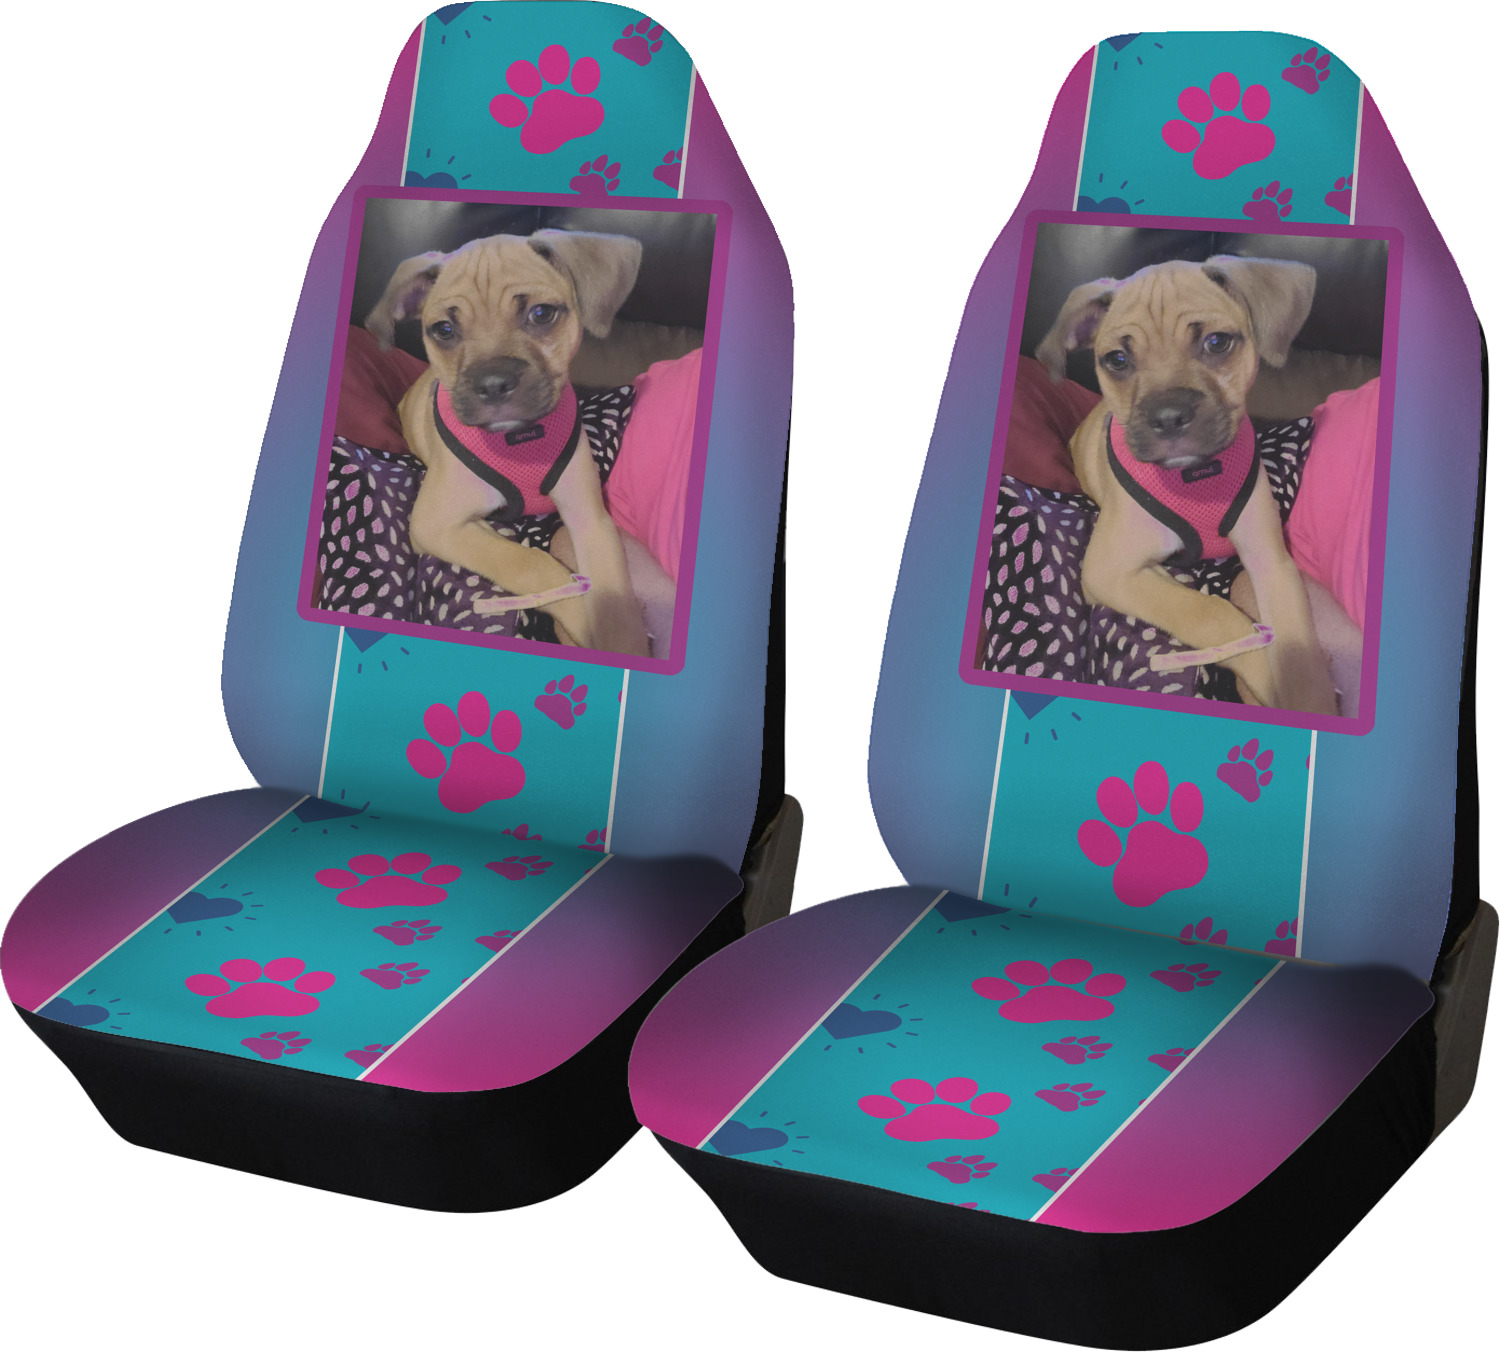 Custom Car Seat Covers | Design & Preview Online - YouCustomizeIt